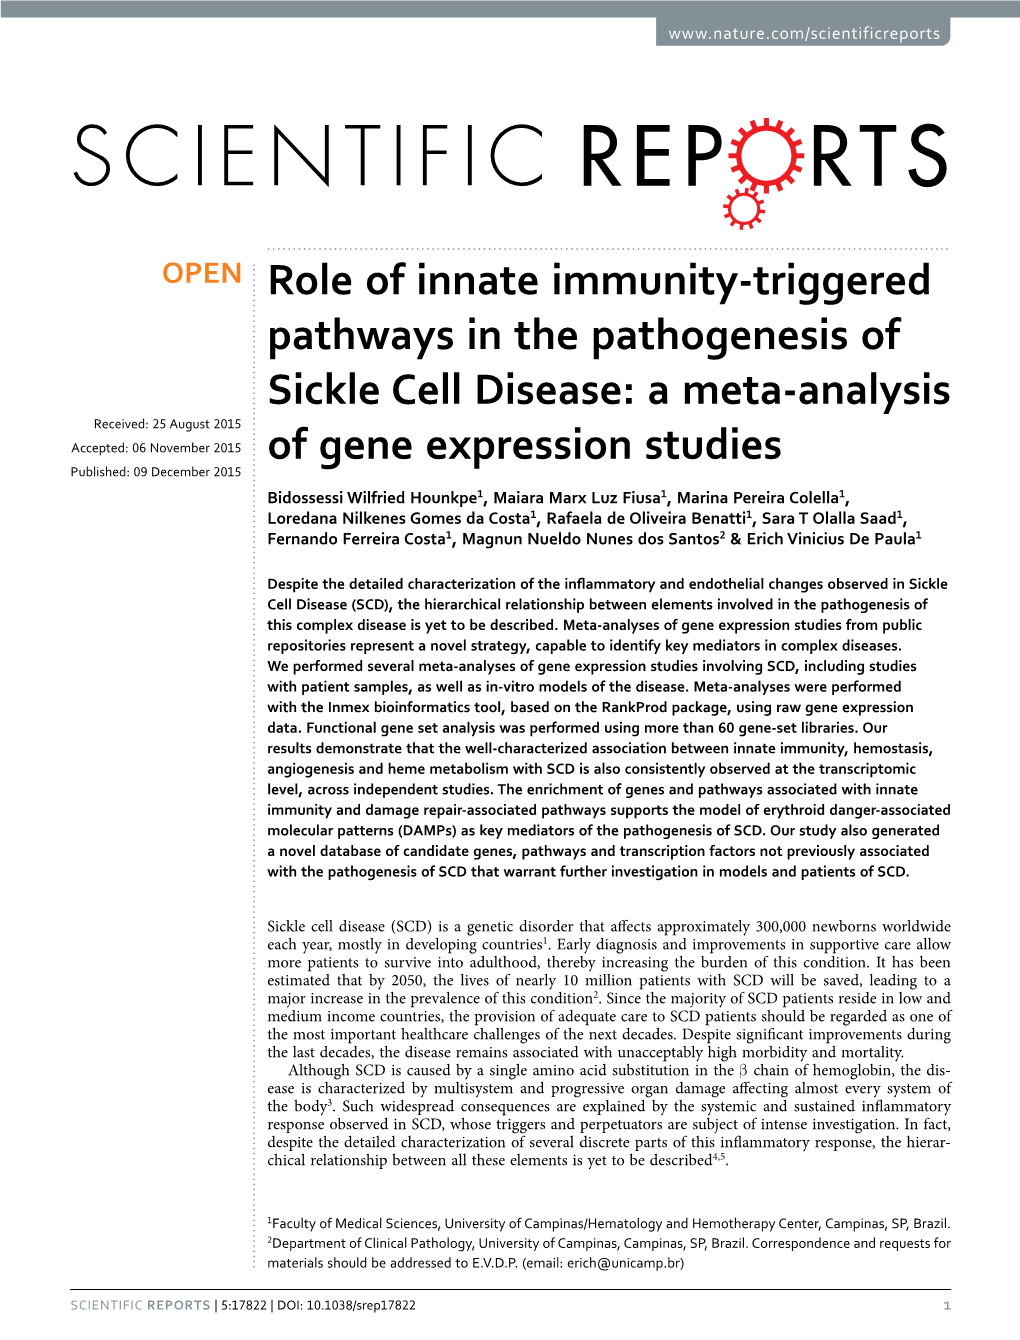 Role of Innate Immunity-Triggered Pathways in the Pathogenesis of Sickle Cell Disease: a Meta-Analysis of Gene Expression Studies